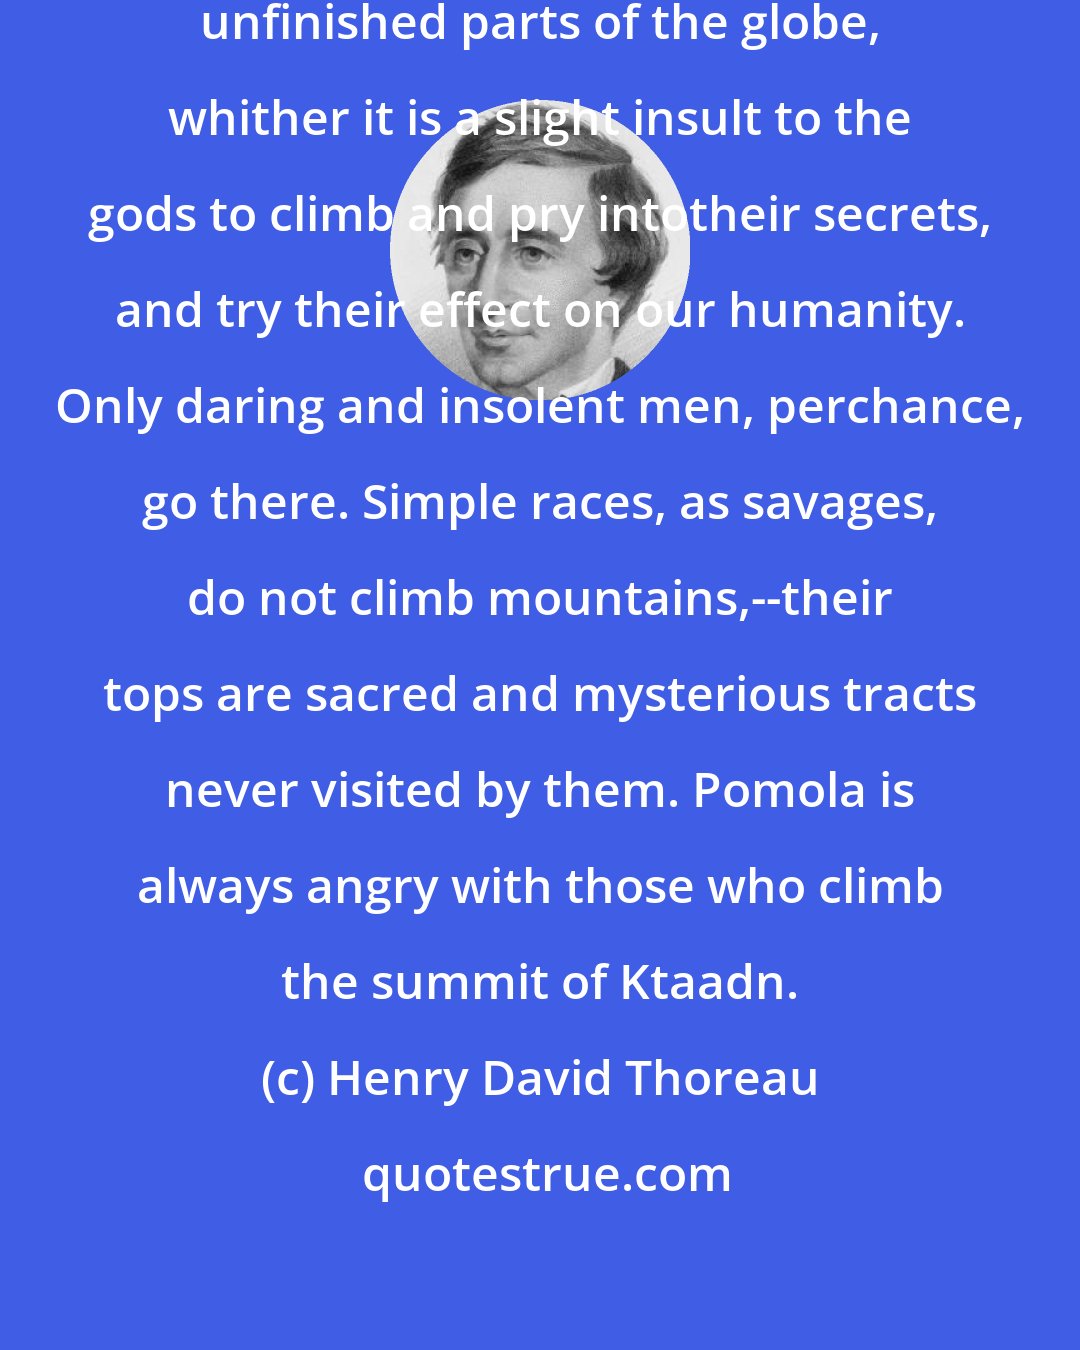 Henry David Thoreau: The tops of mountains are among the unfinished parts of the globe, whither it is a slight insult to the gods to climb and pry intotheir secrets, and try their effect on our humanity. Only daring and insolent men, perchance, go there. Simple races, as savages, do not climb mountains,--their tops are sacred and mysterious tracts never visited by them. Pomola is always angry with those who climb the summit of Ktaadn.